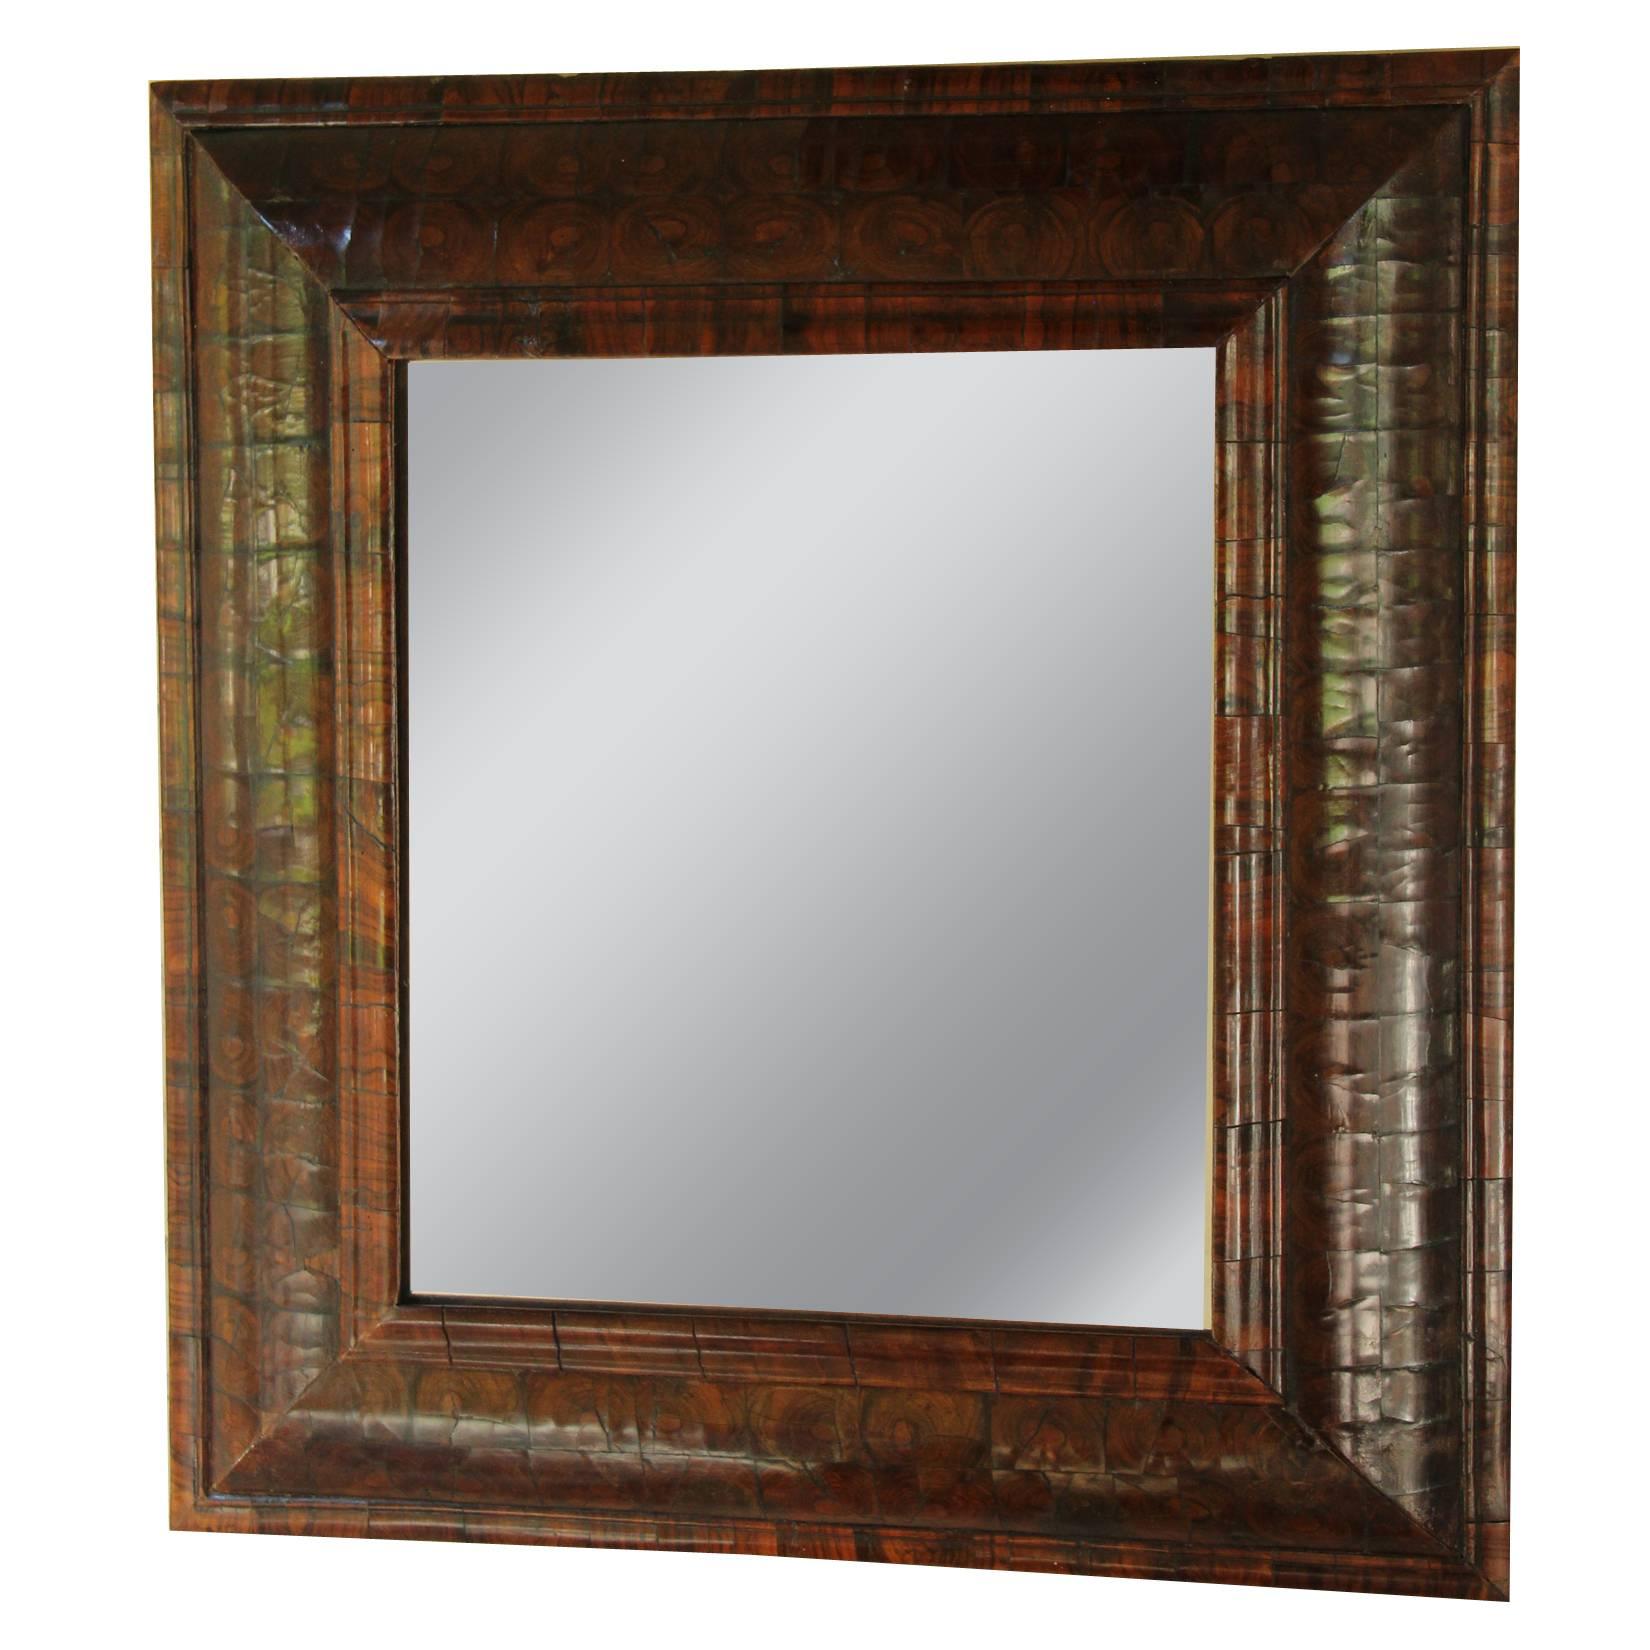 English Rosewood Mirror with Removable Arched Top, 18th Century Antique